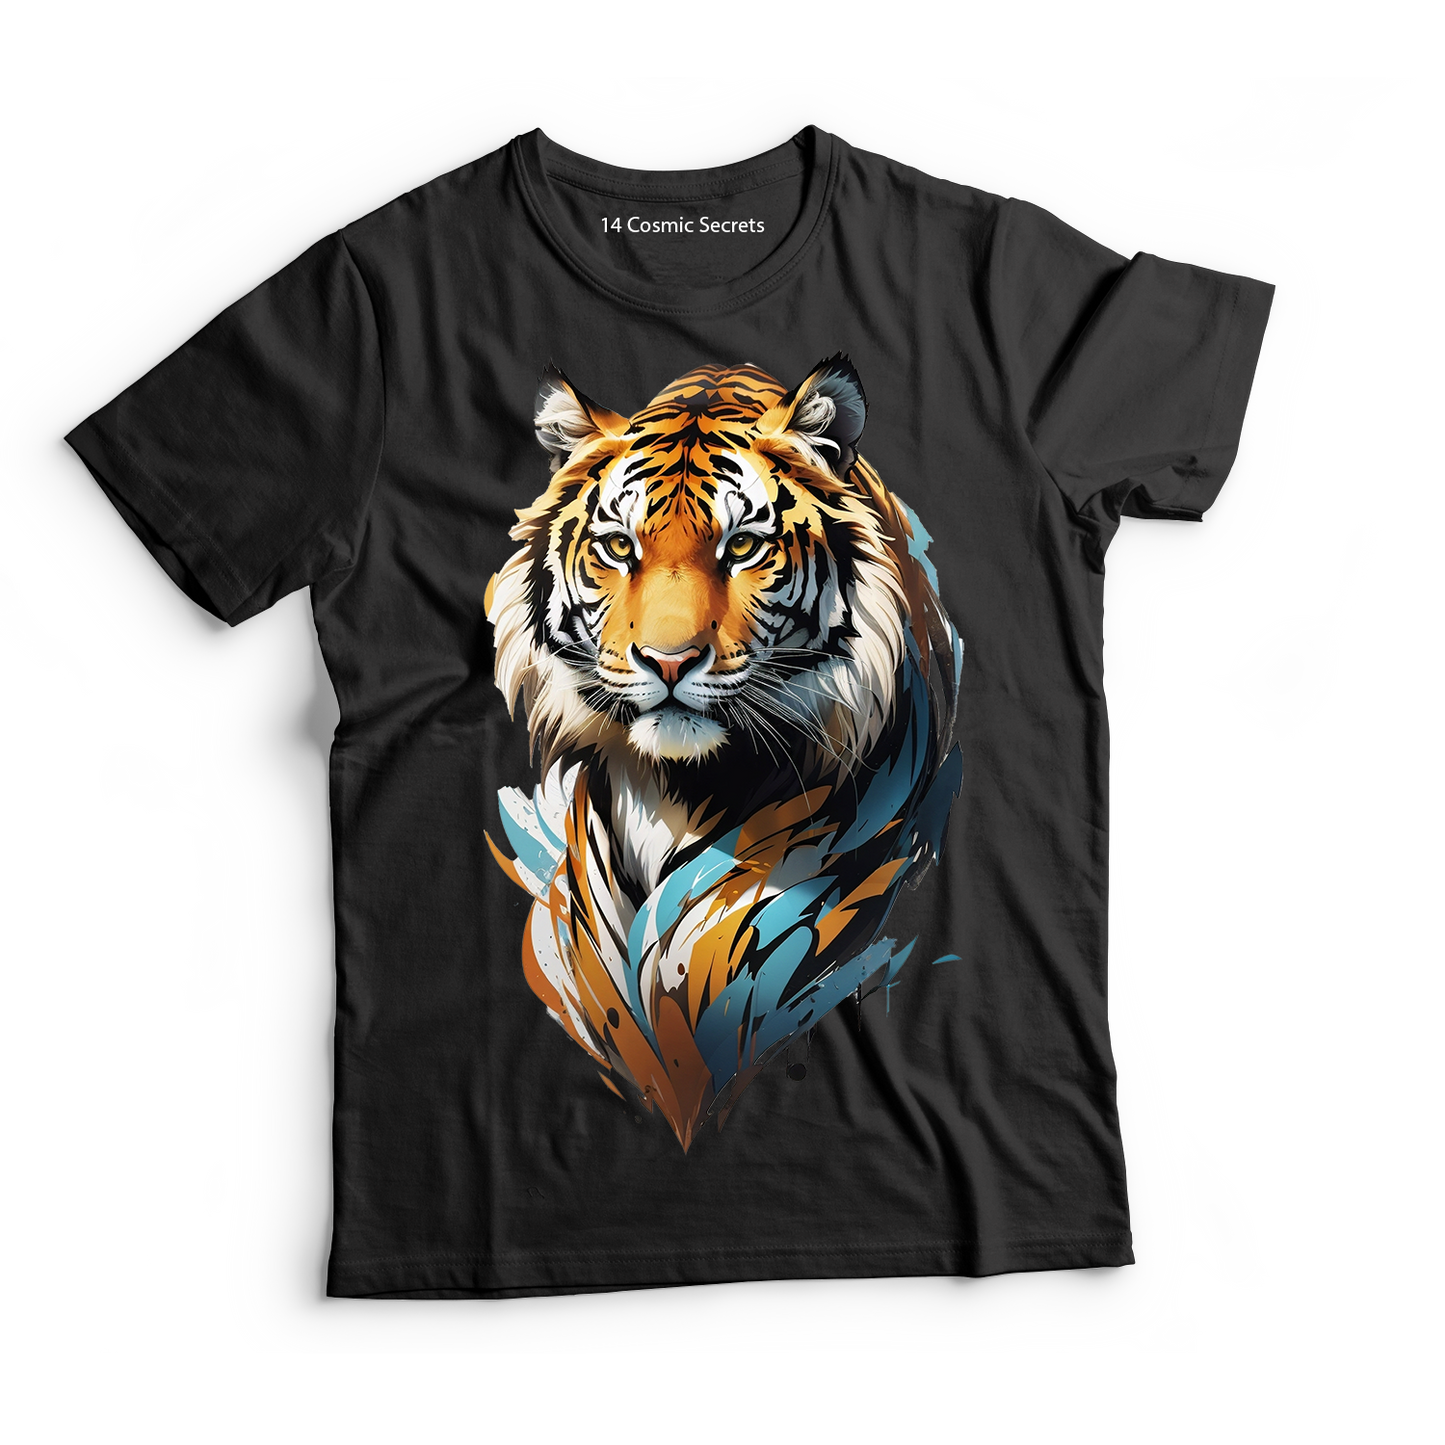 Bengal Roar Graphic Shirt Graphic Printed T-Shirt  Cotton T-Shirt Magnificence of India T-Shirt